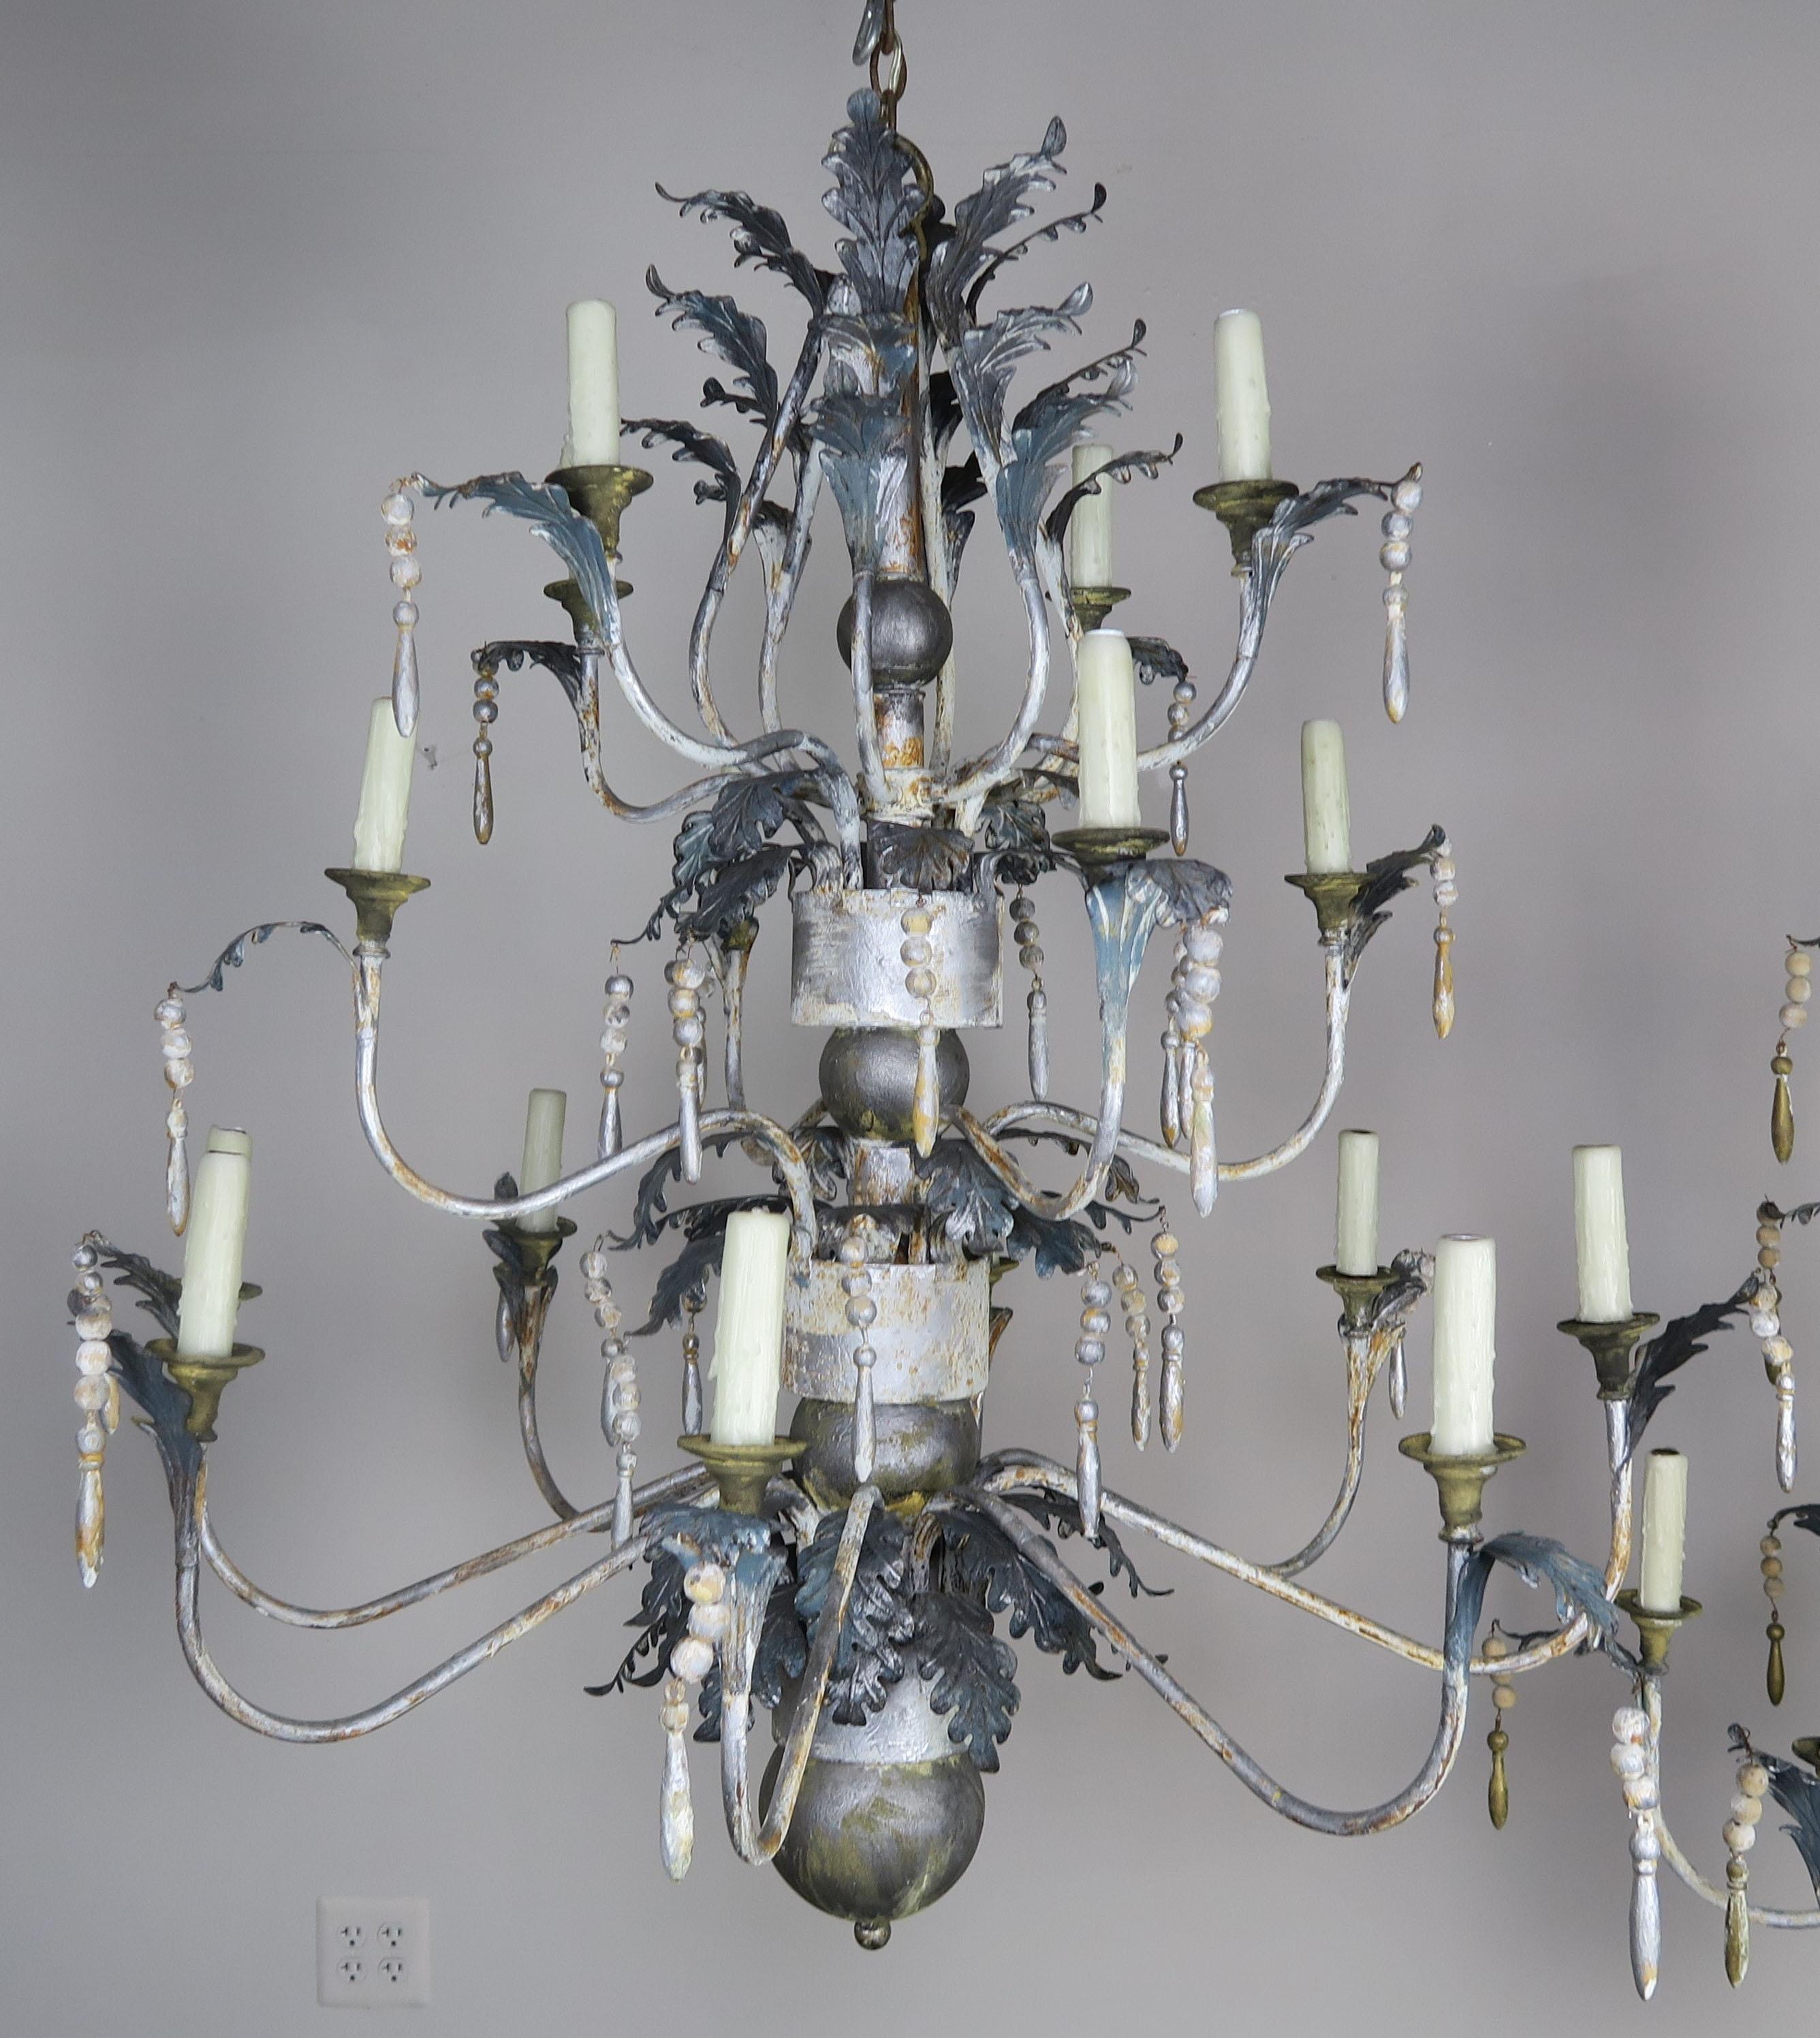 Pair of Italian painted wood and metal chandeliers with acanthus leaves and wood tassels throughout. Newly rewired and in working condition with chain and canopy included.